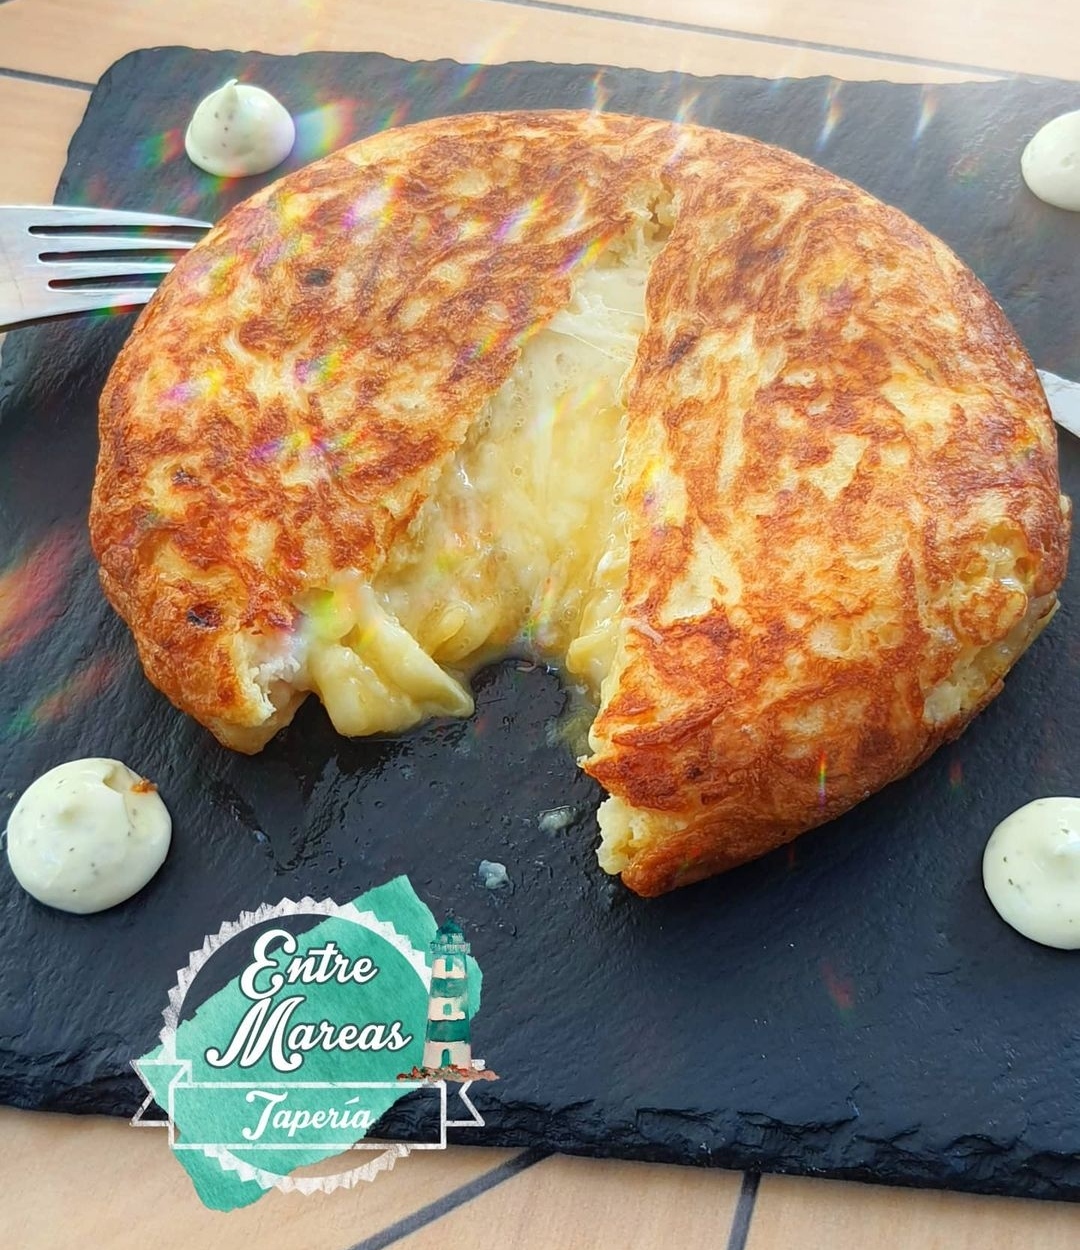 Omelette stuffed with potatoes, mozzarella cheese and caramelized onion